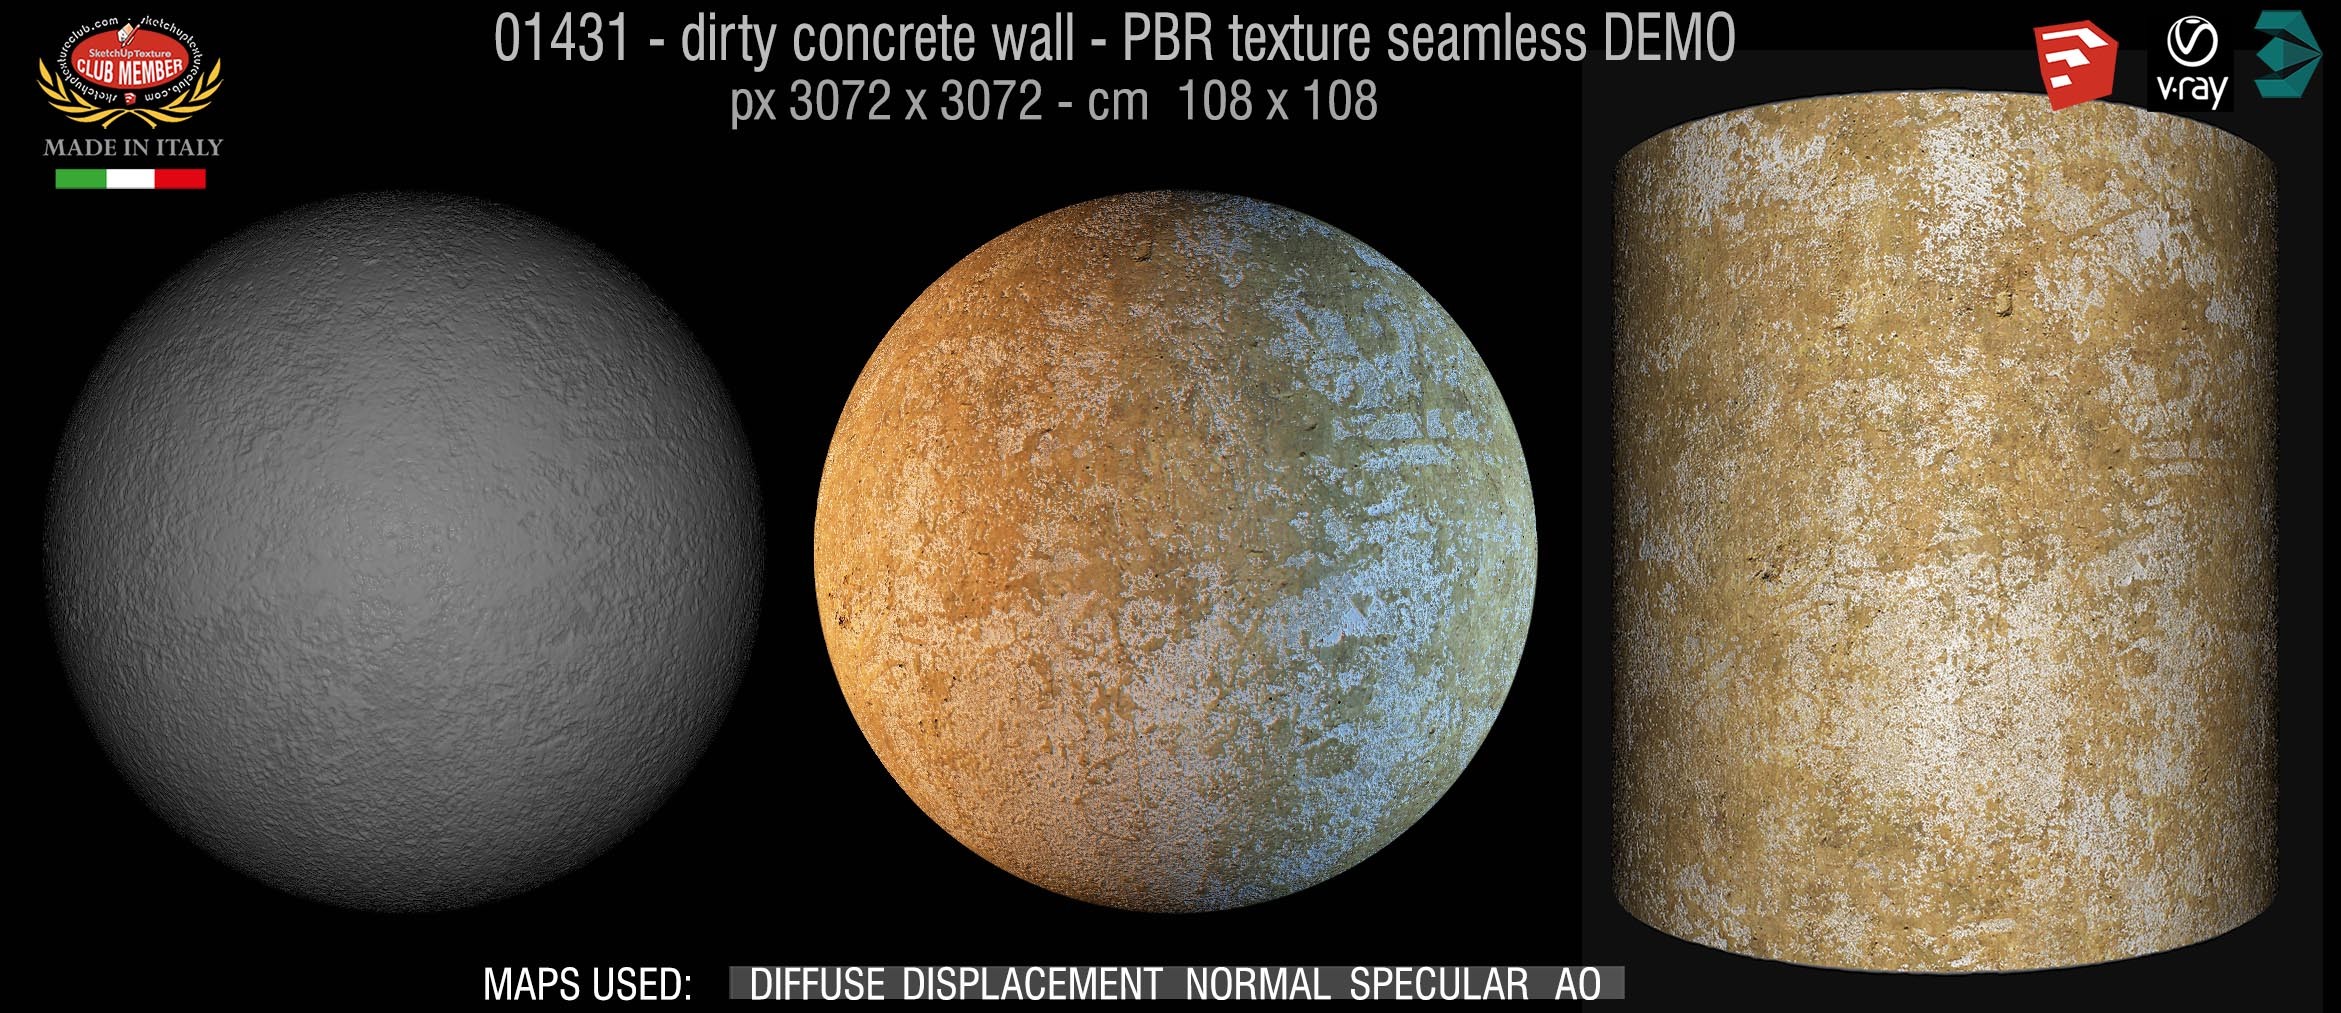 01431 Concrete bare dirty wall PBR texture seamless DEMO